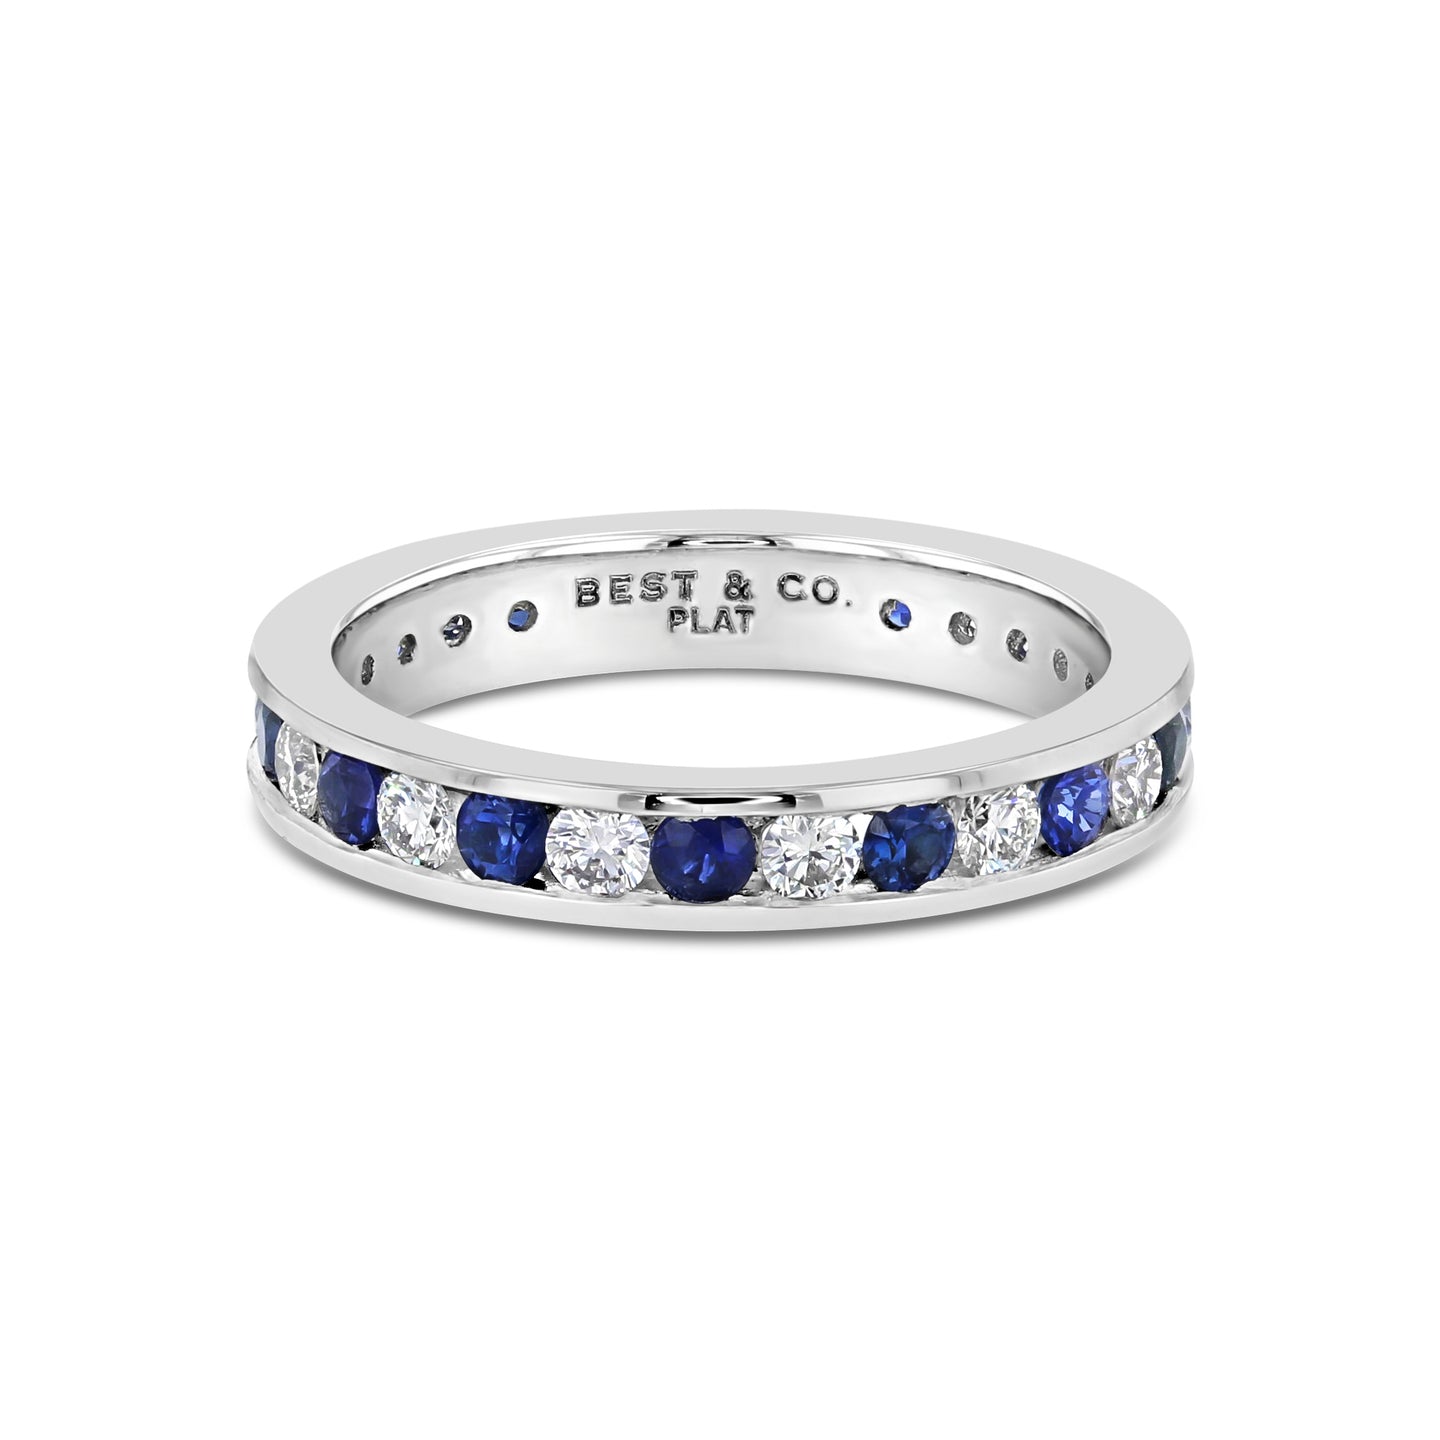 Blue Sapphire and Diamond Band - Best & Co.